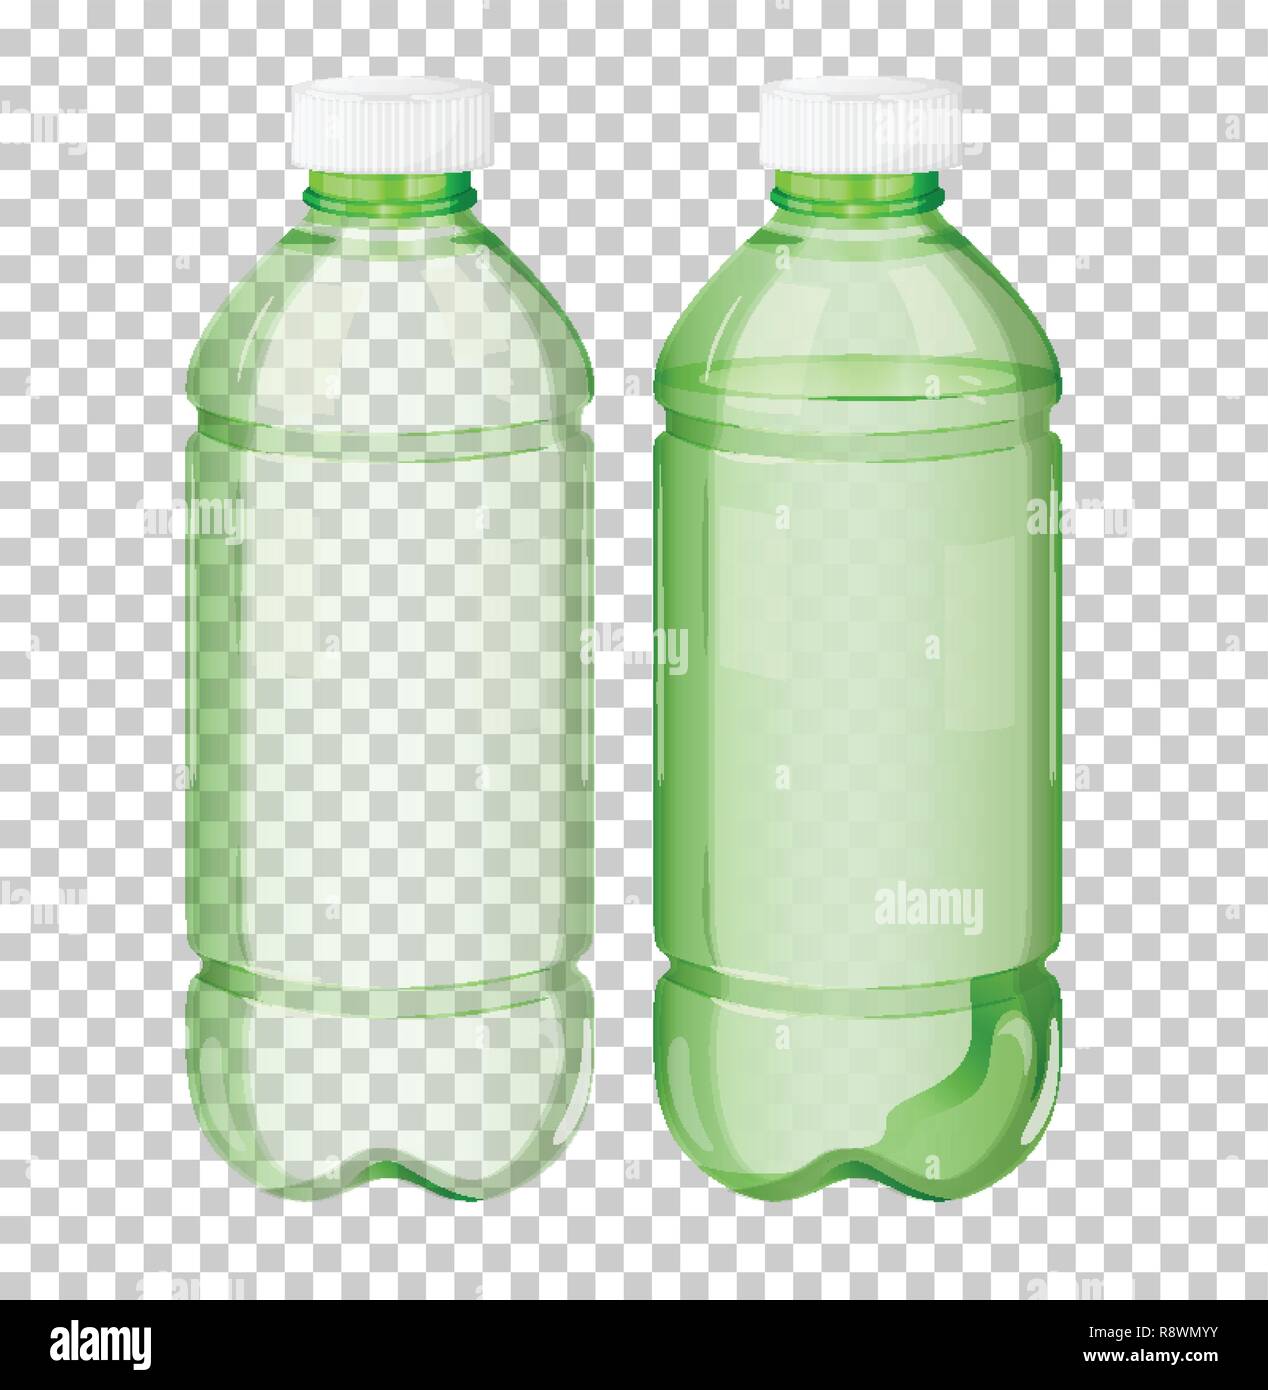 Download and share clipart about Water Bottle Clipart Three Water - Water  Bottle Illustration, Find more high …